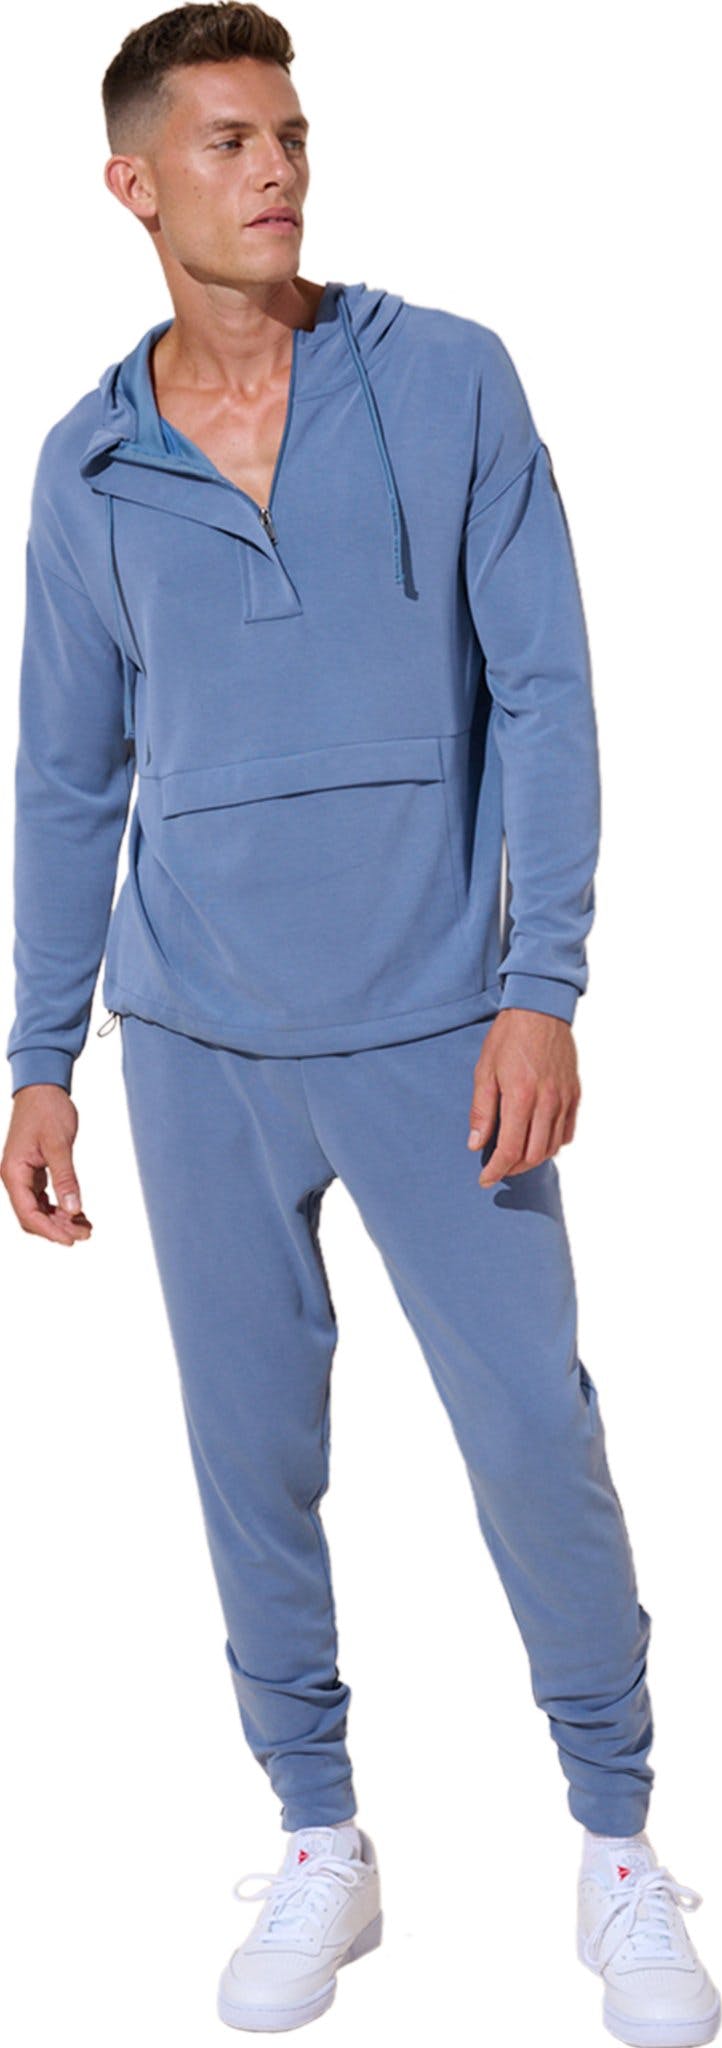 Product image for The Sunday Jogger Pant - Men's